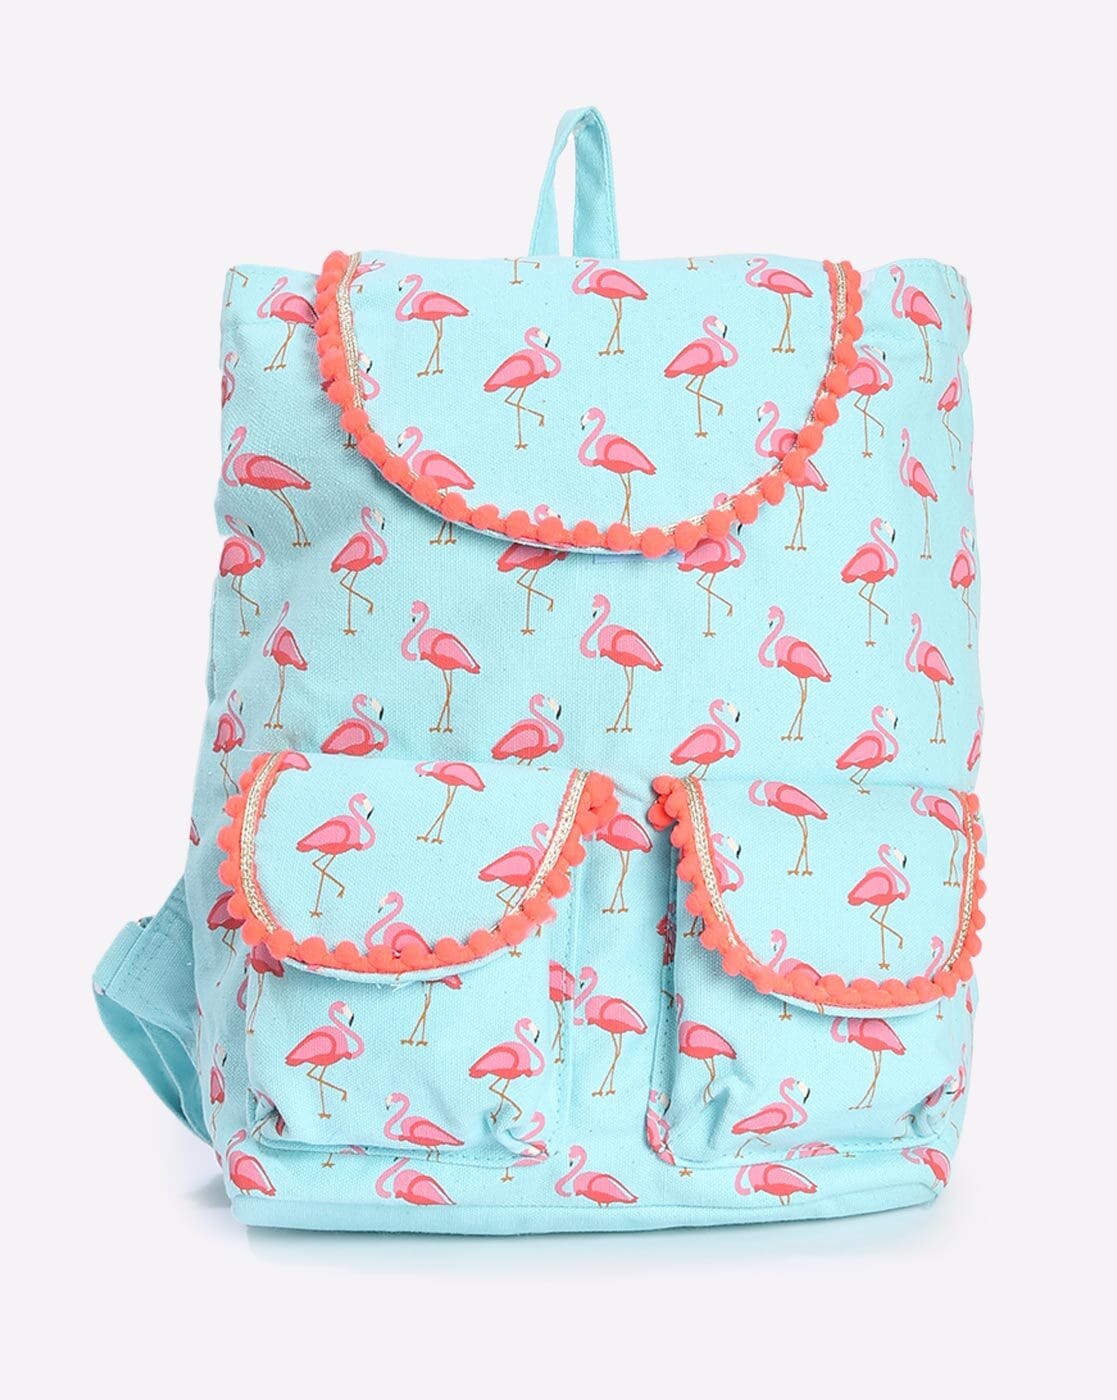 Flamingo Multi-Function Diaper Bag for Baby Care Travel Backpack Wide Open  Nappy Bags Handbags Large Capacity Blue : Amazon.in: Baby Products